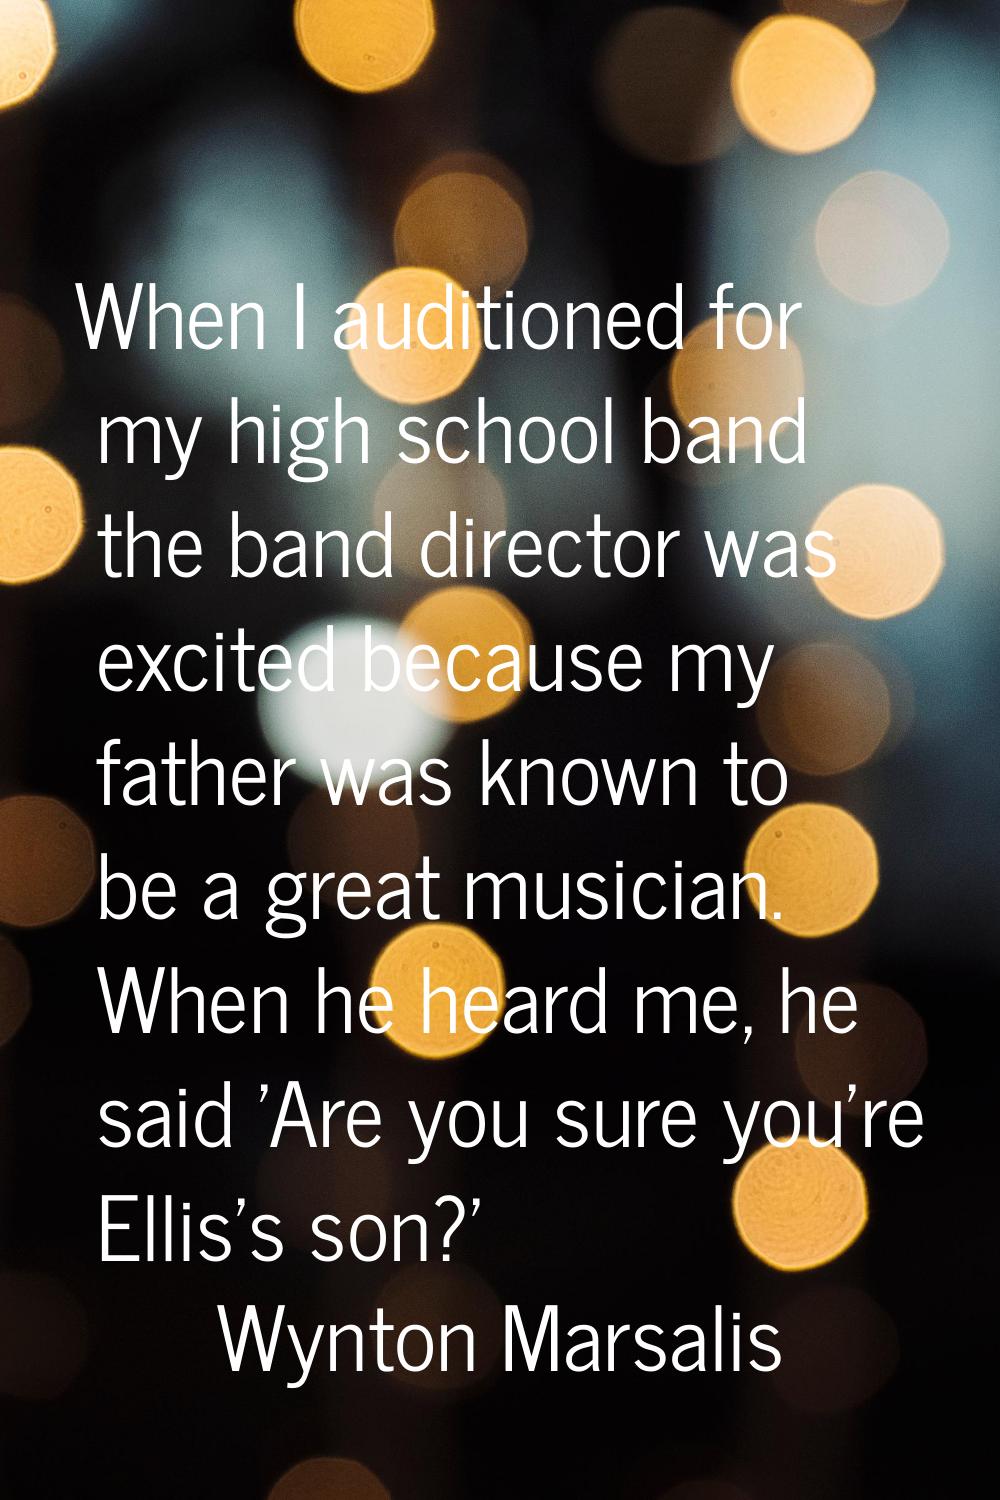 When I auditioned for my high school band the band director was excited because my father was known